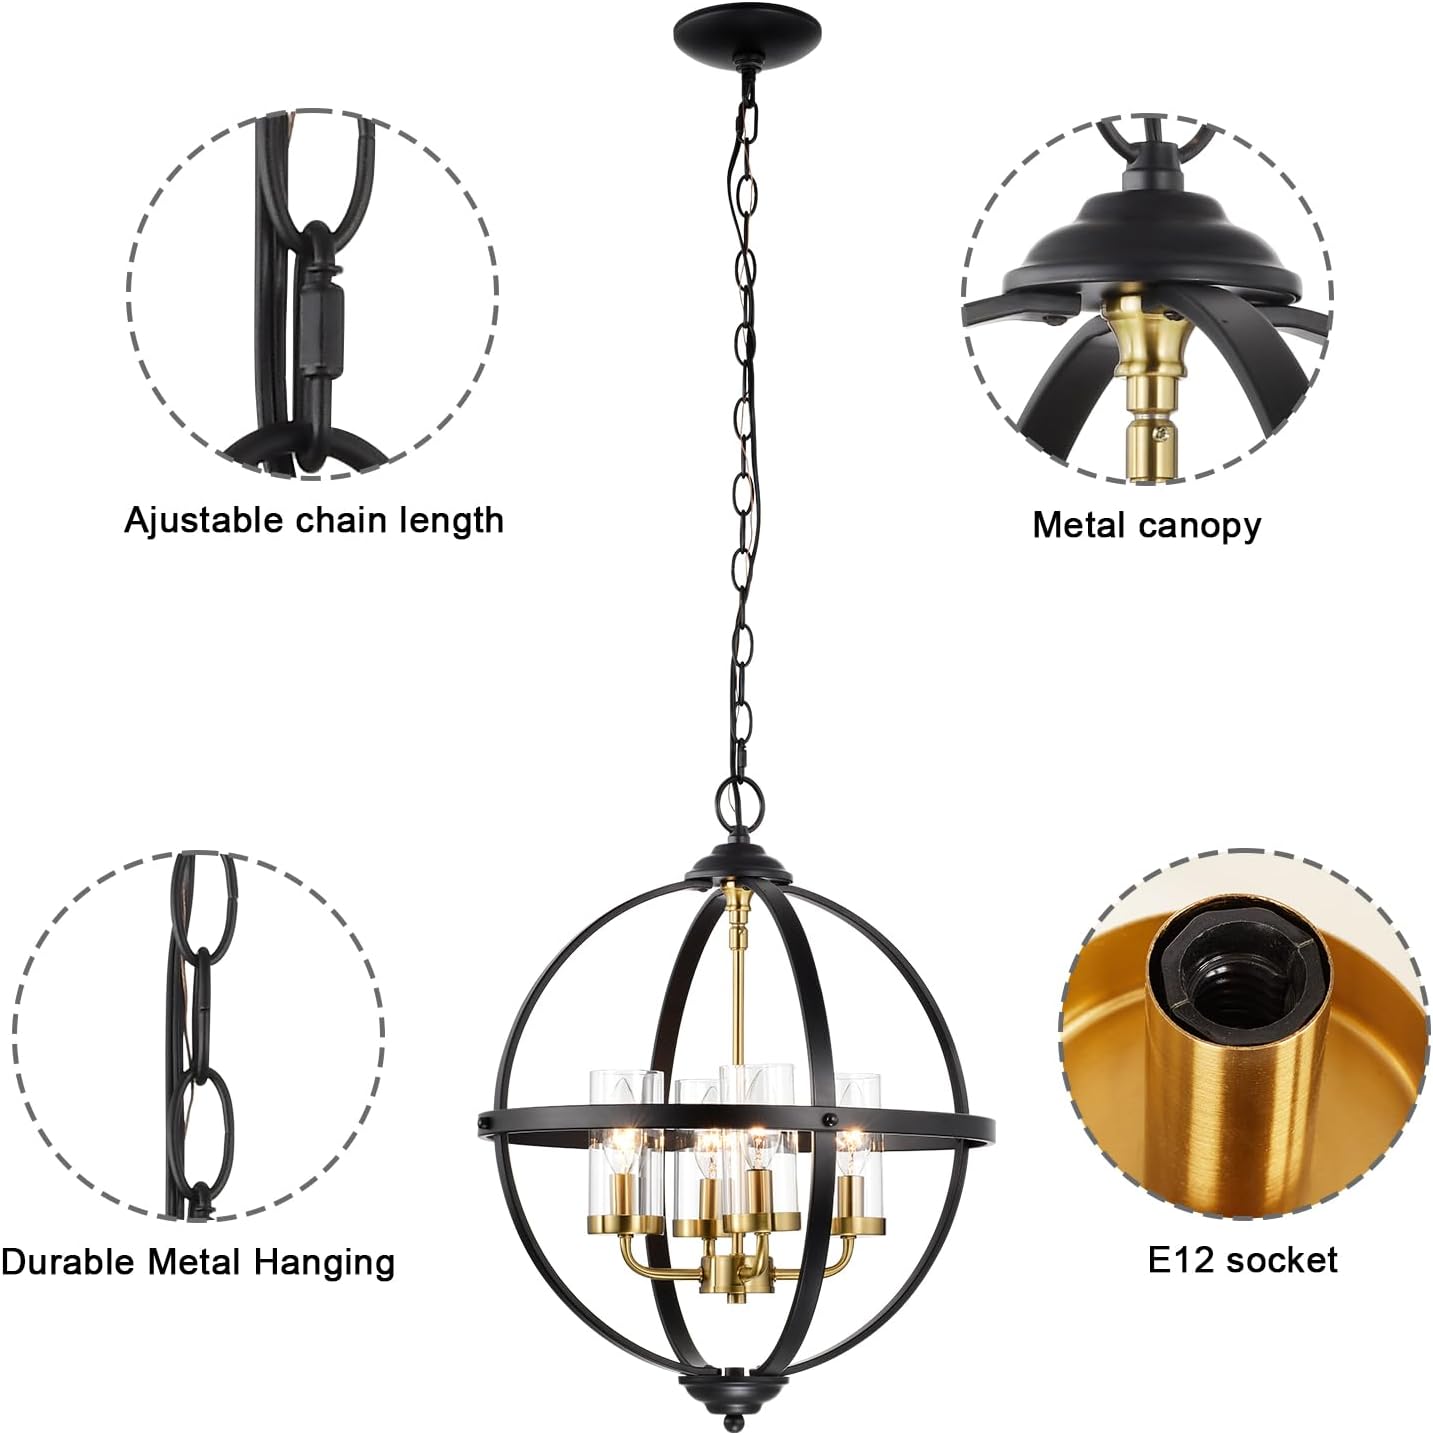 AvaMalis A|M Lighting Rustic Chandelier, 20" Black and Gold Finish Glass Cover Luxurious Hanging Light, 4 Lights Globe Vintage Pendant Ceiling Light Fixtures